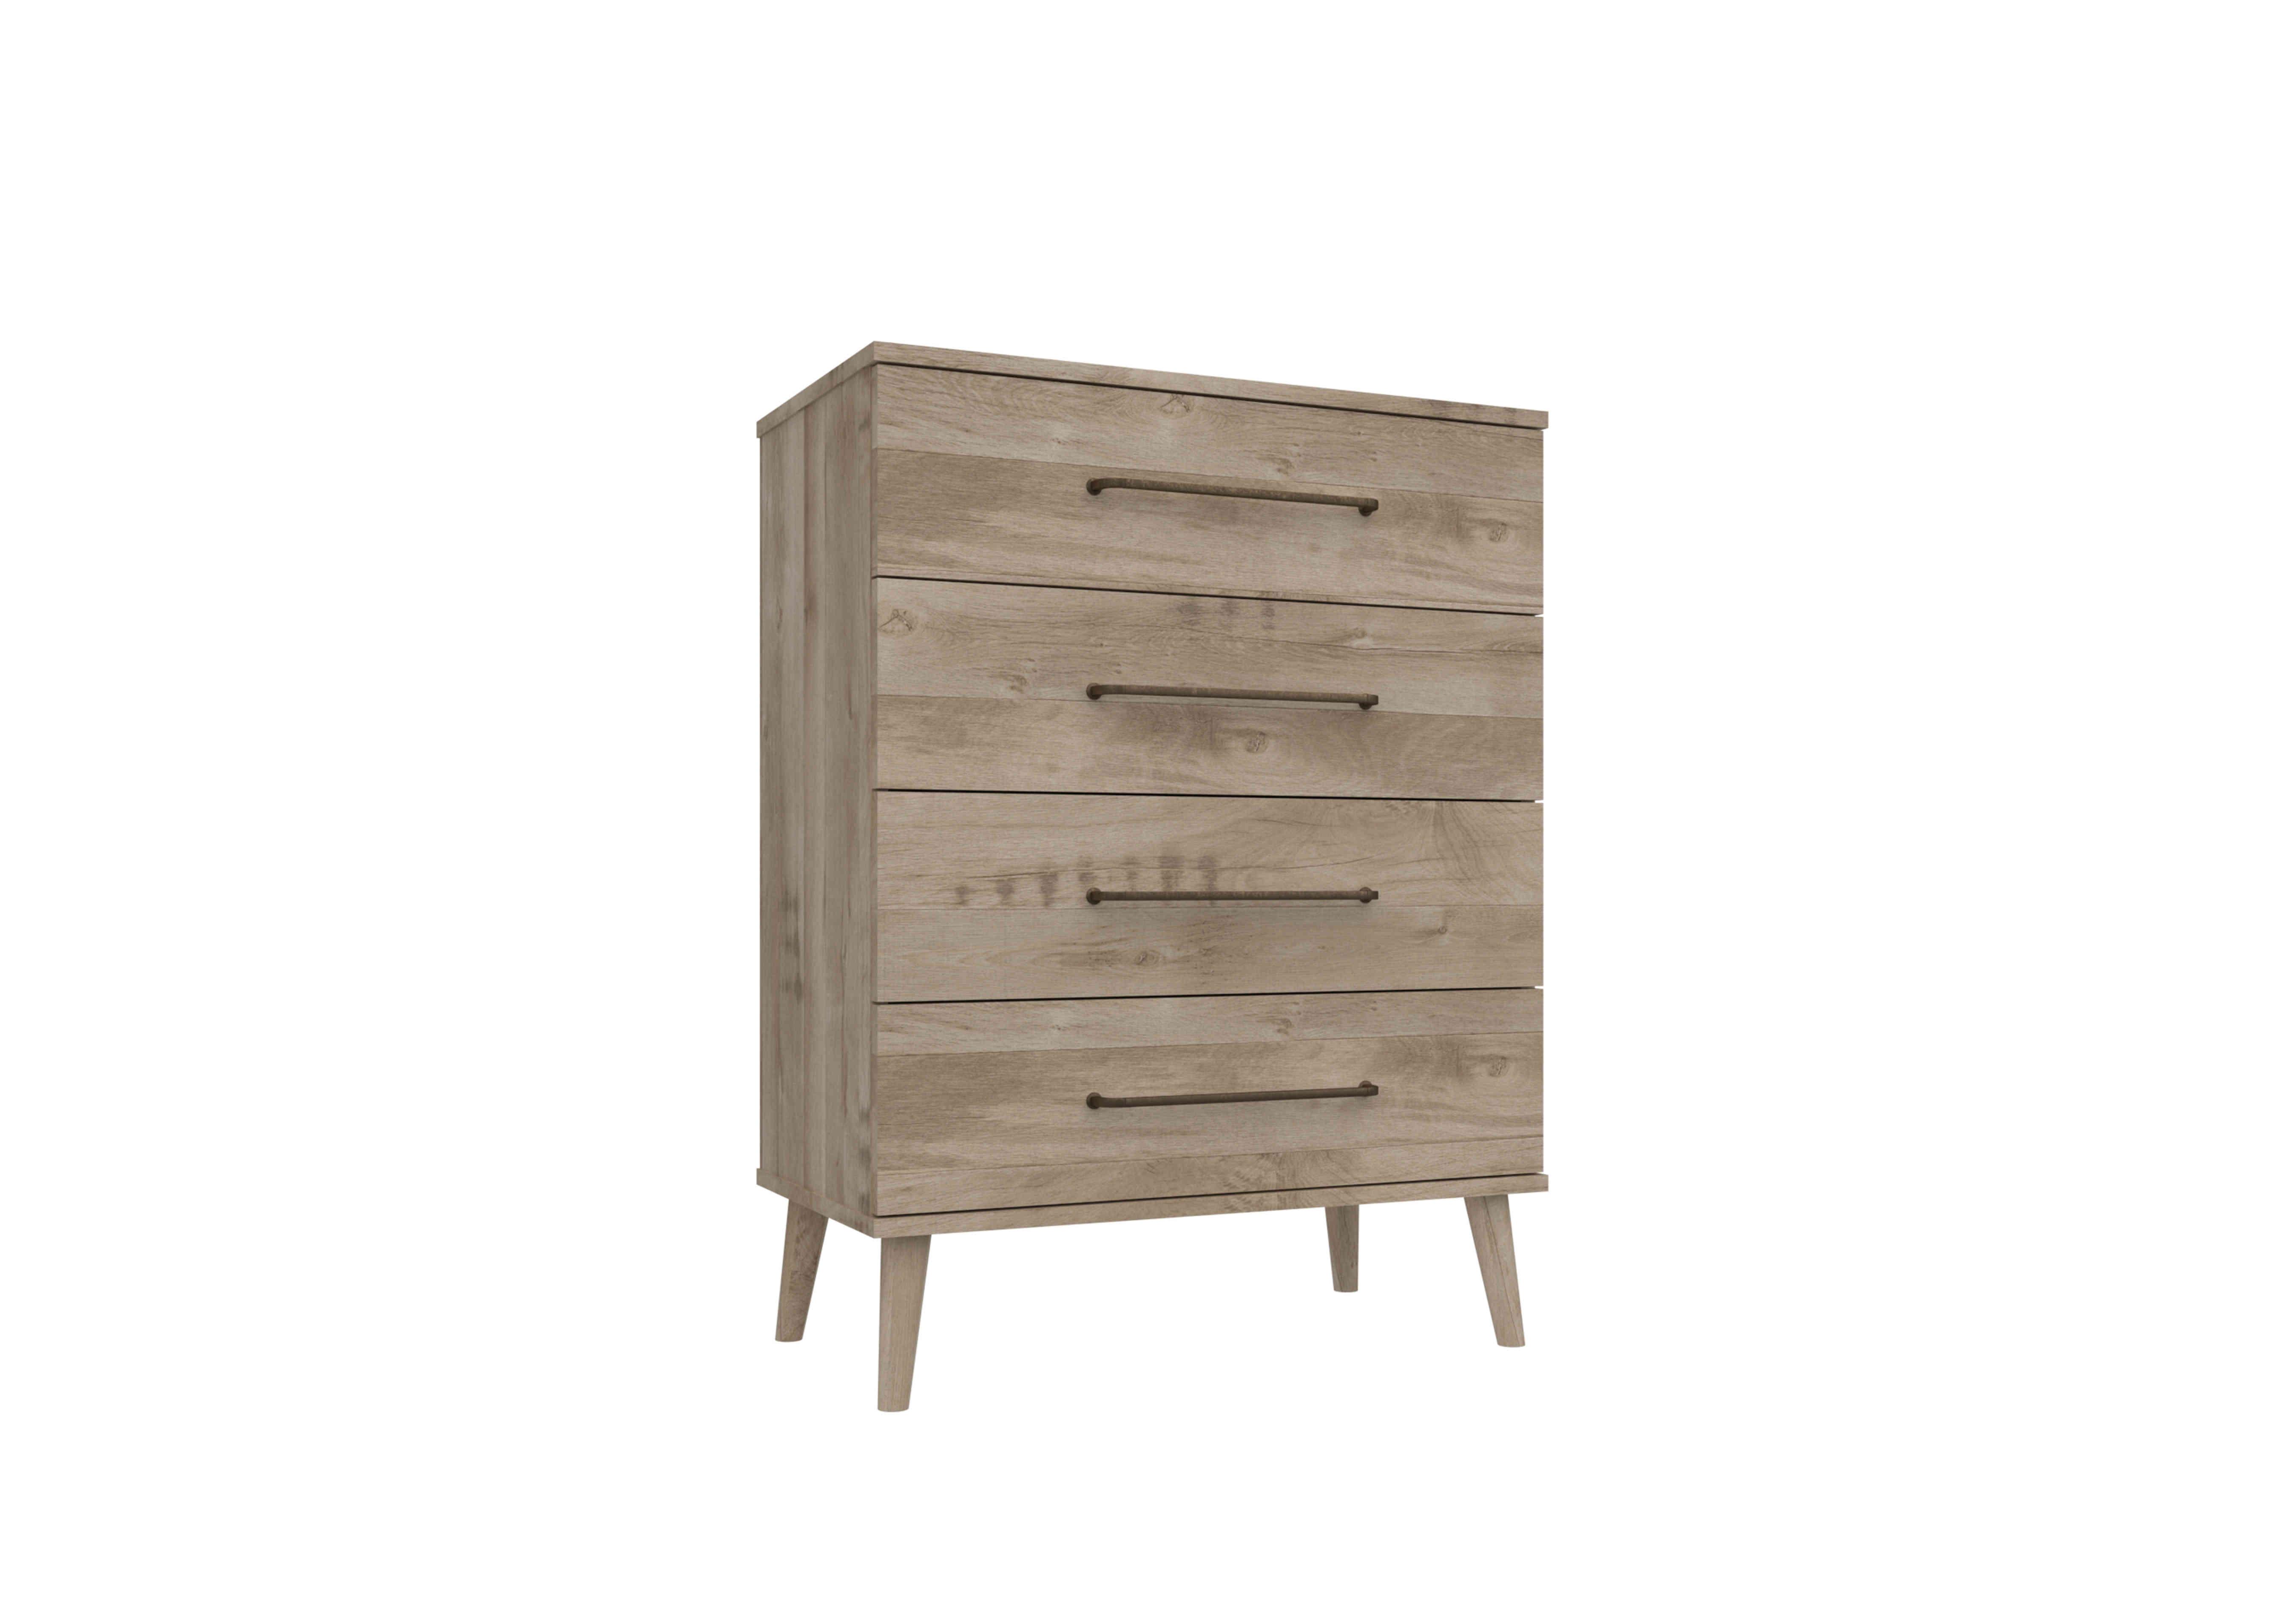 Finchley 4 Drawer Chest in Italian Natural Oak on Furniture Village